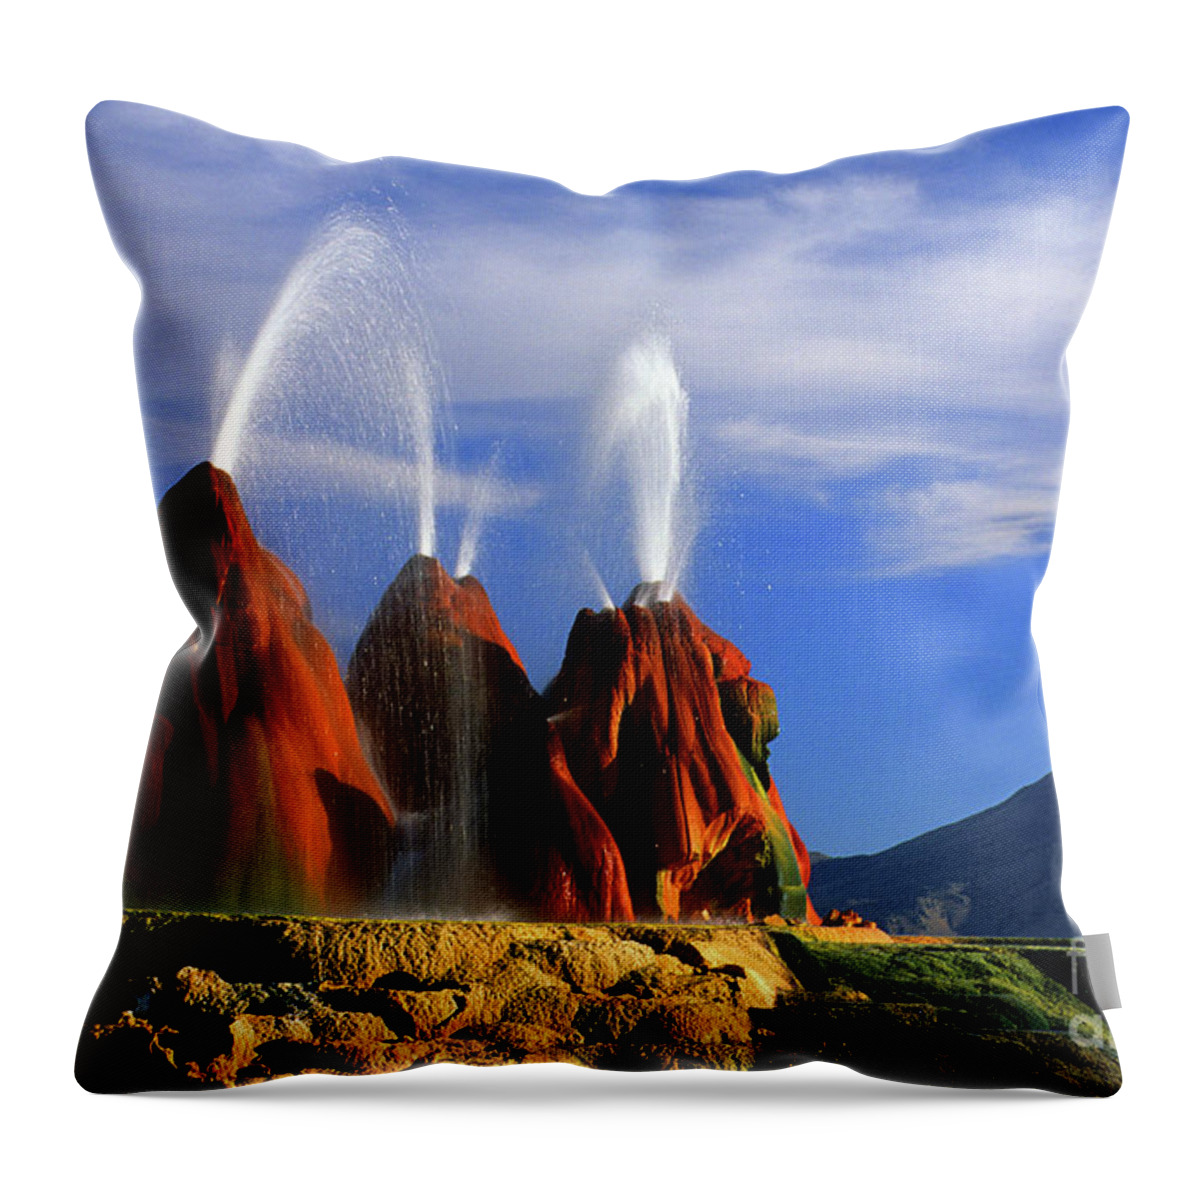 Geyser Throw Pillow featuring the photograph Fly Geyser Nevada by Bob Christopher